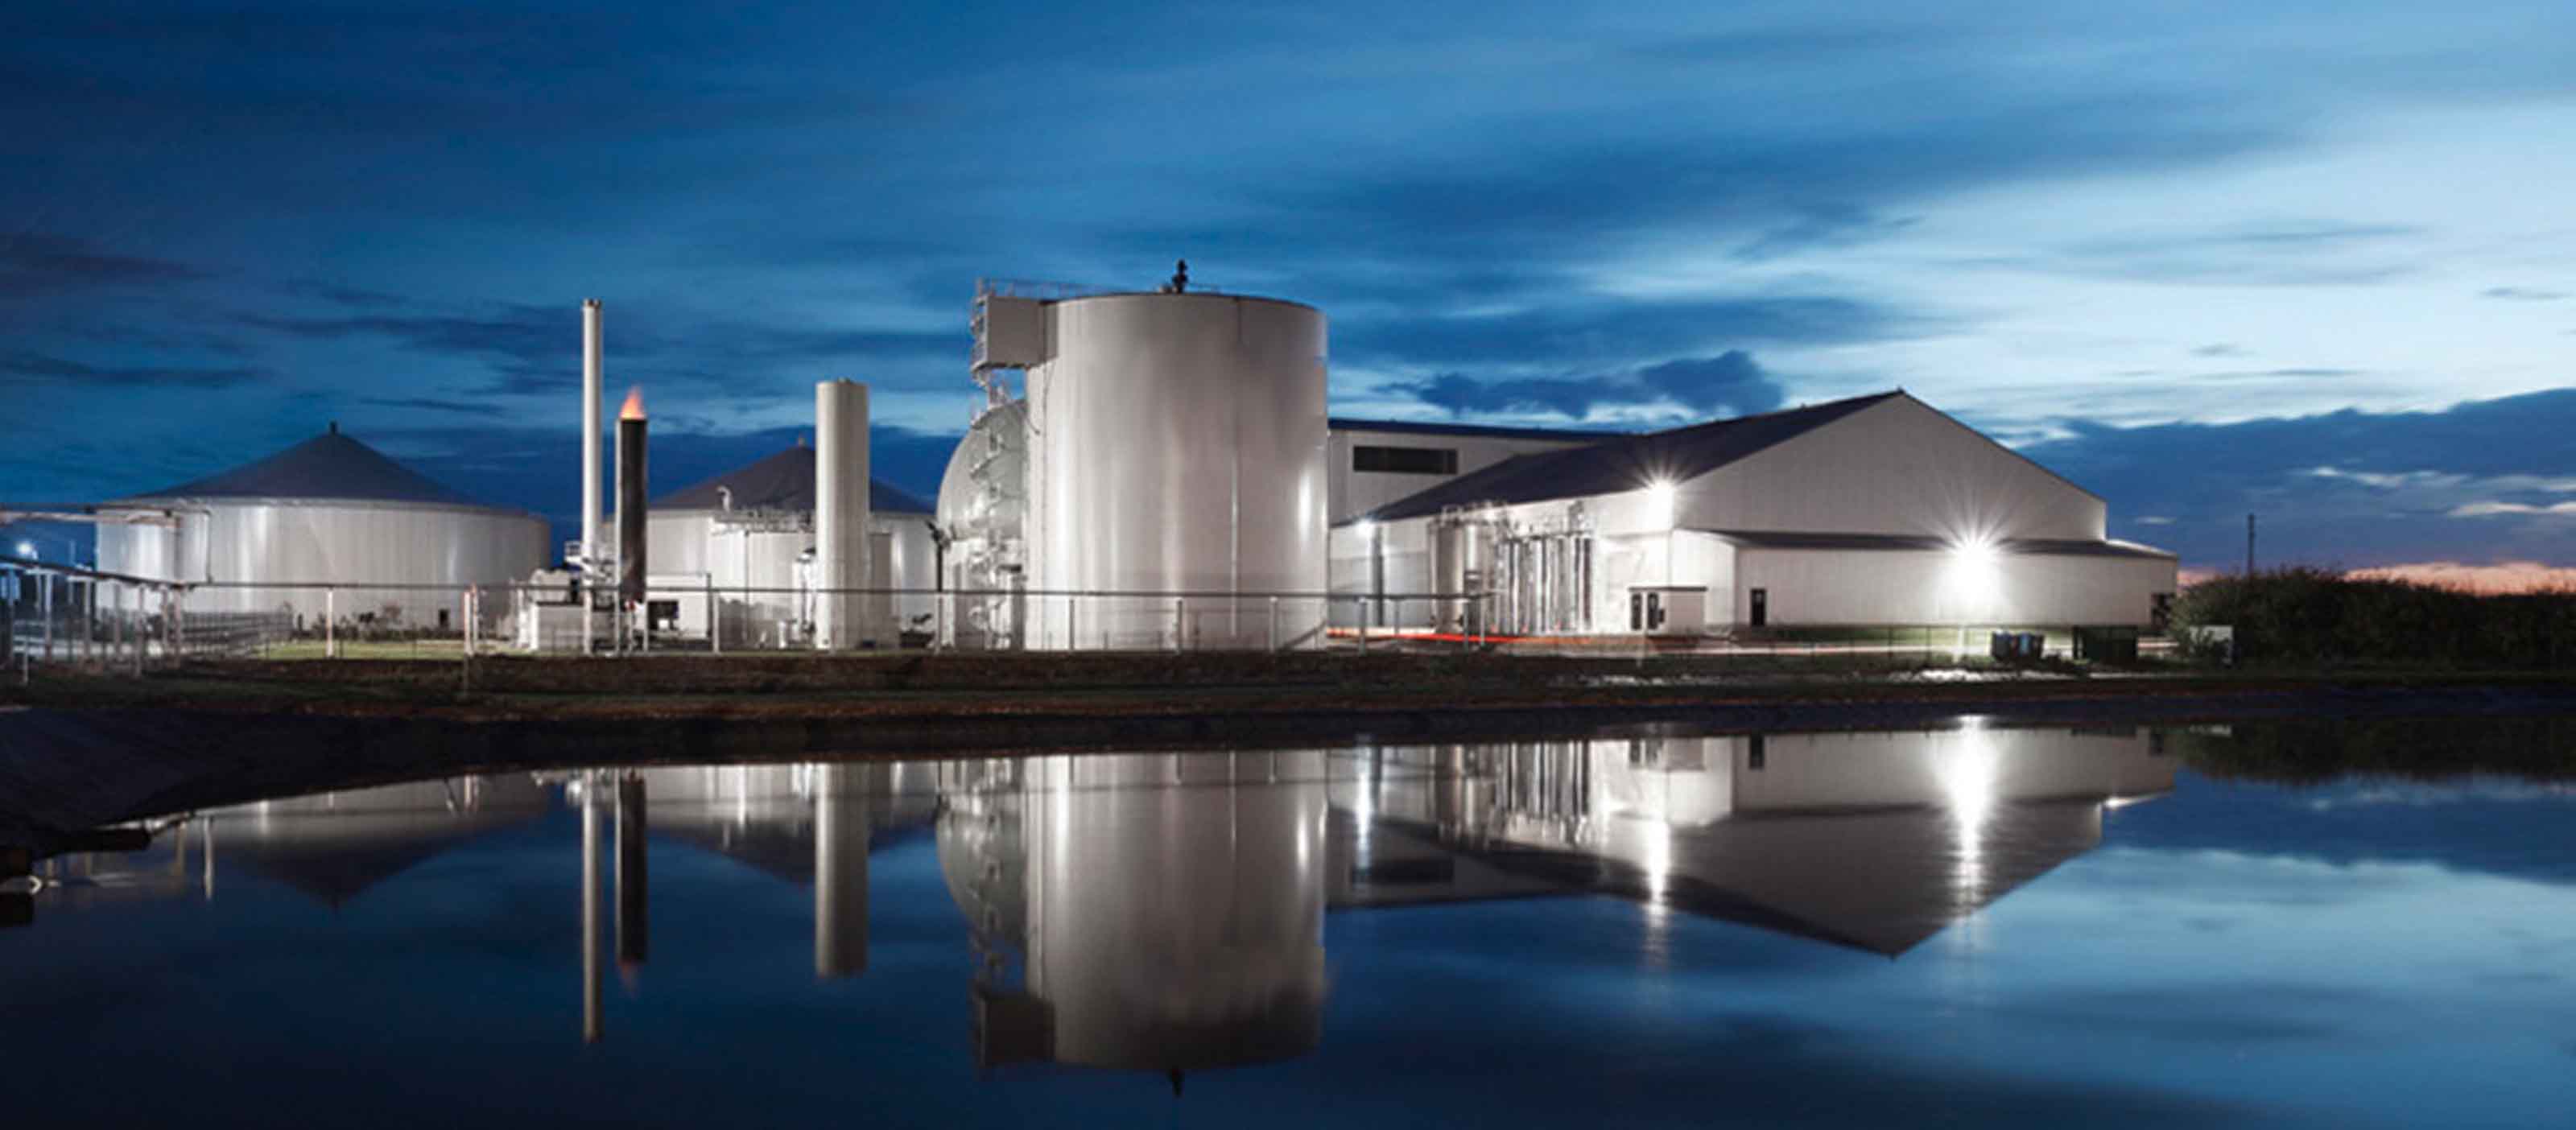 ORmatiC GmbH Provides Reliable Biogas Plant Automation with iFIX and  Proficy Historian | GE Digital